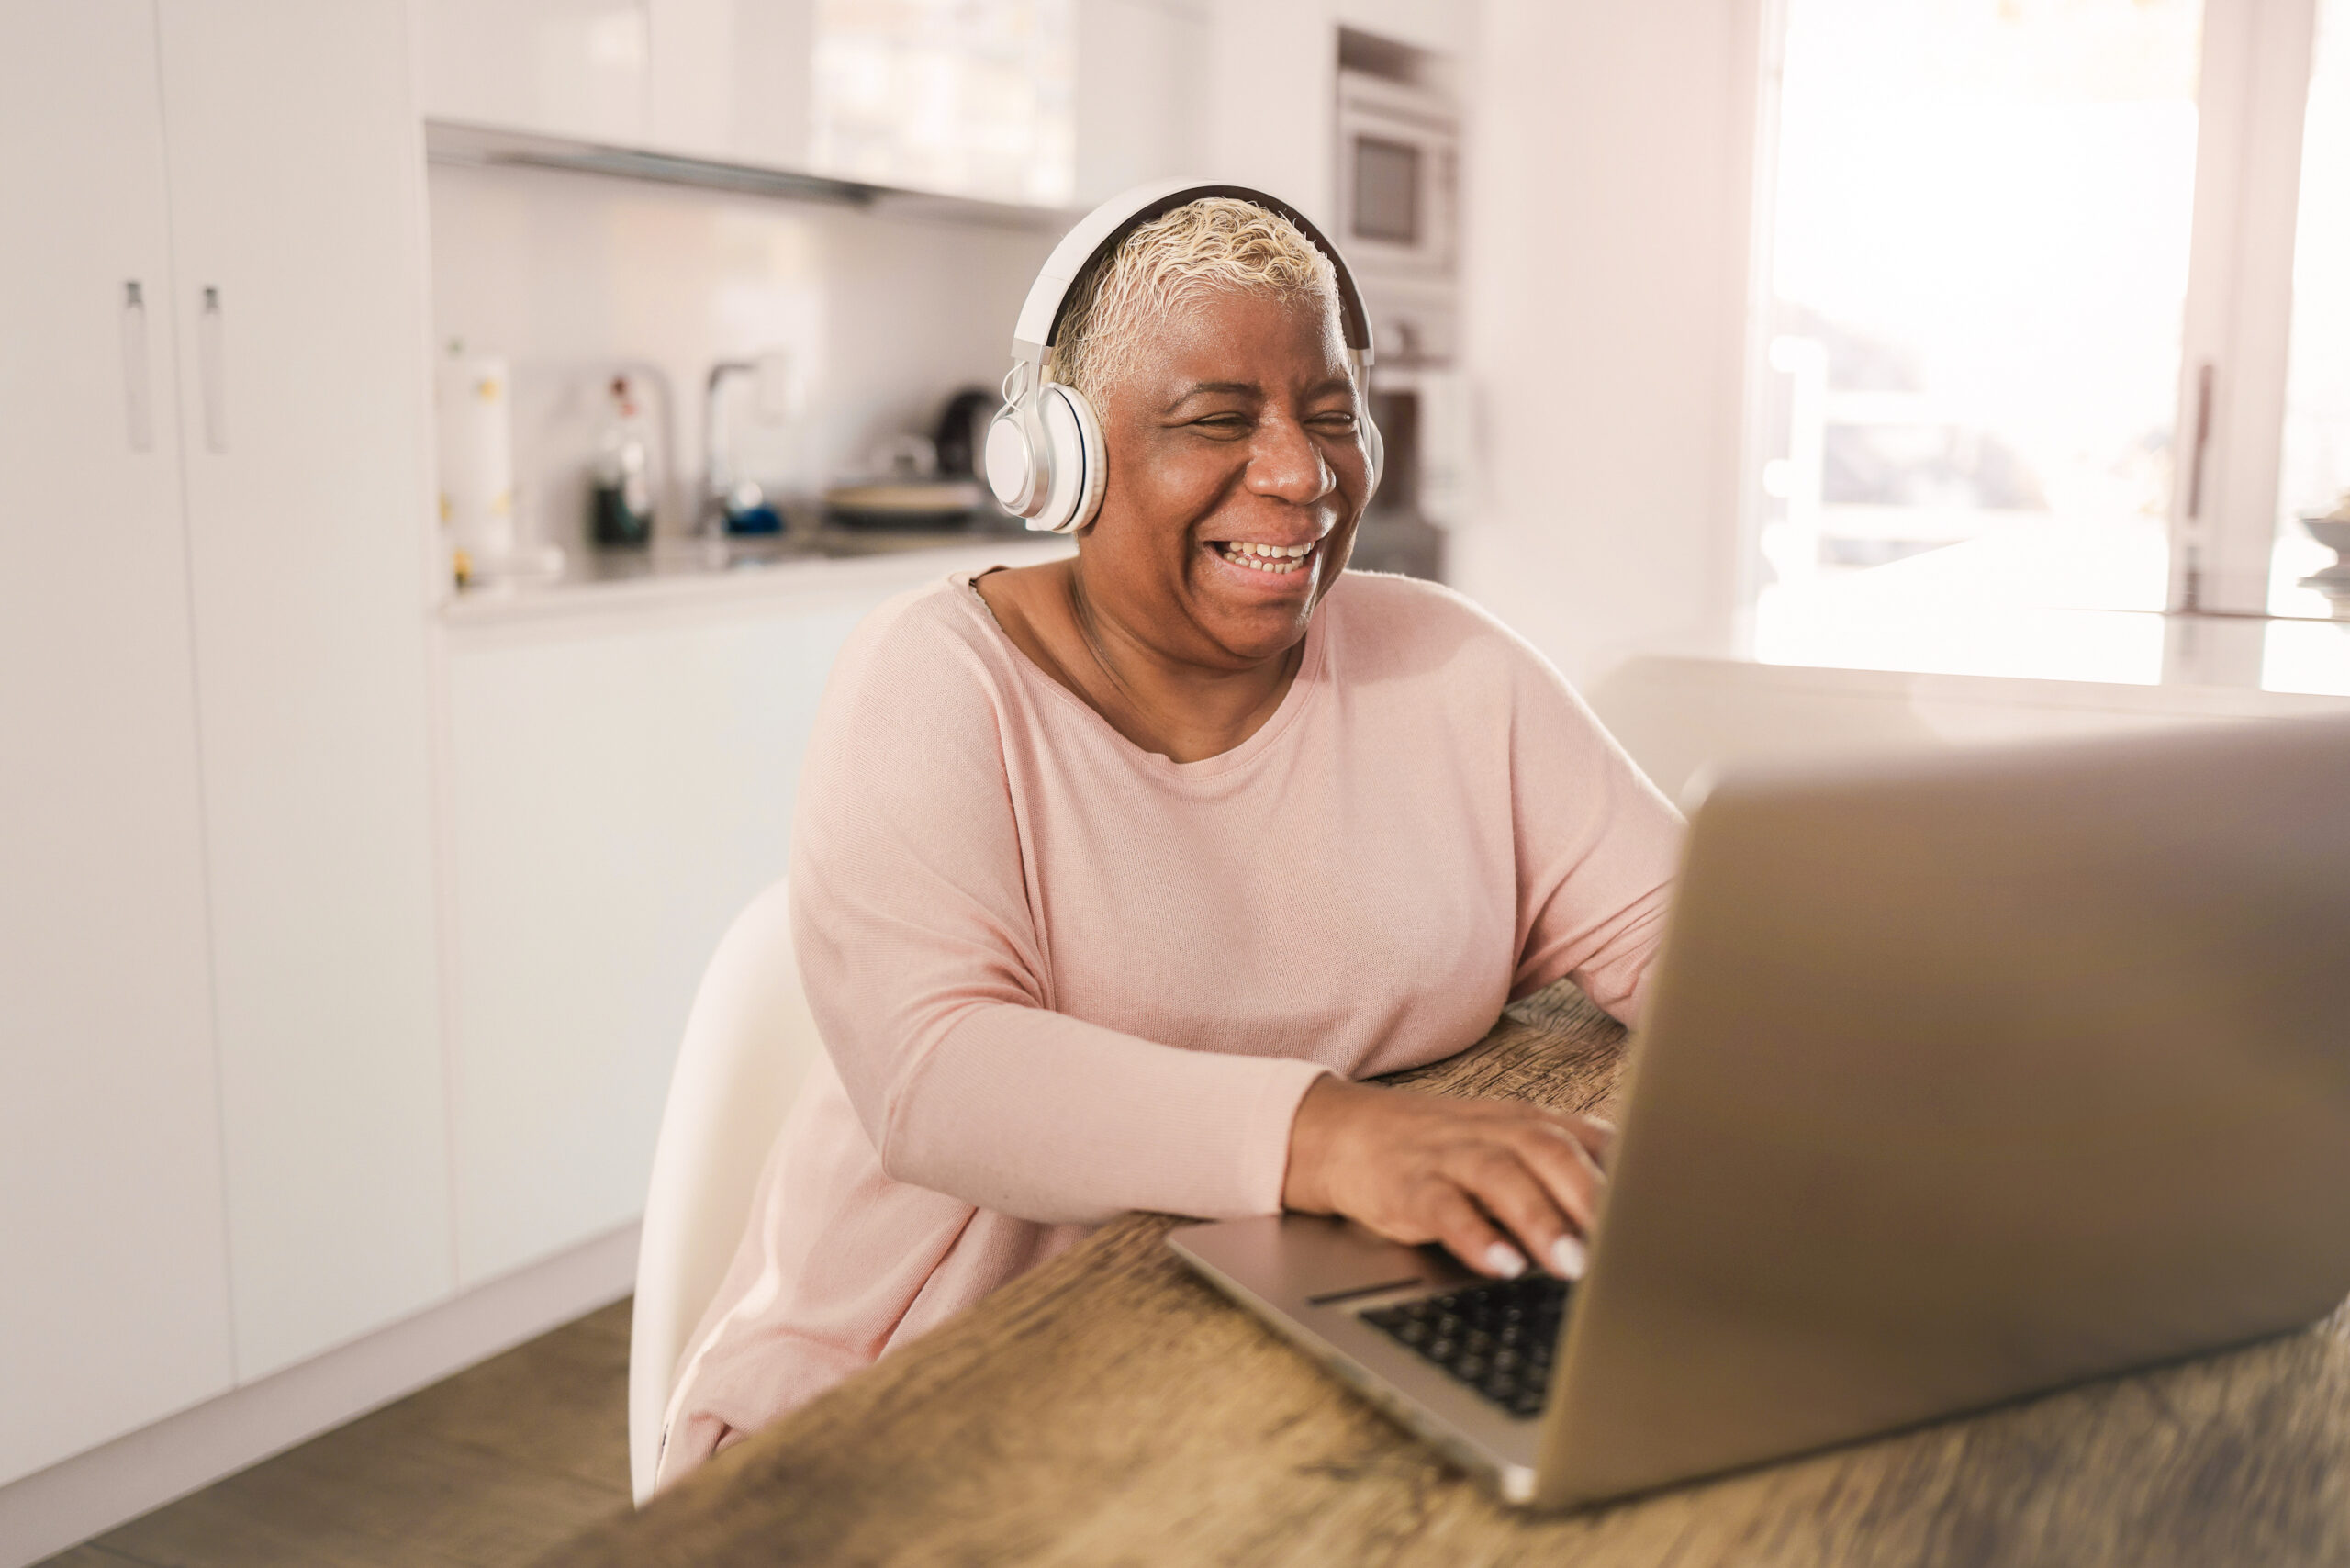 Senior woman using laptop while wearing headphones at home - Joyful elderly lifestyle and technology concept - Focus on face